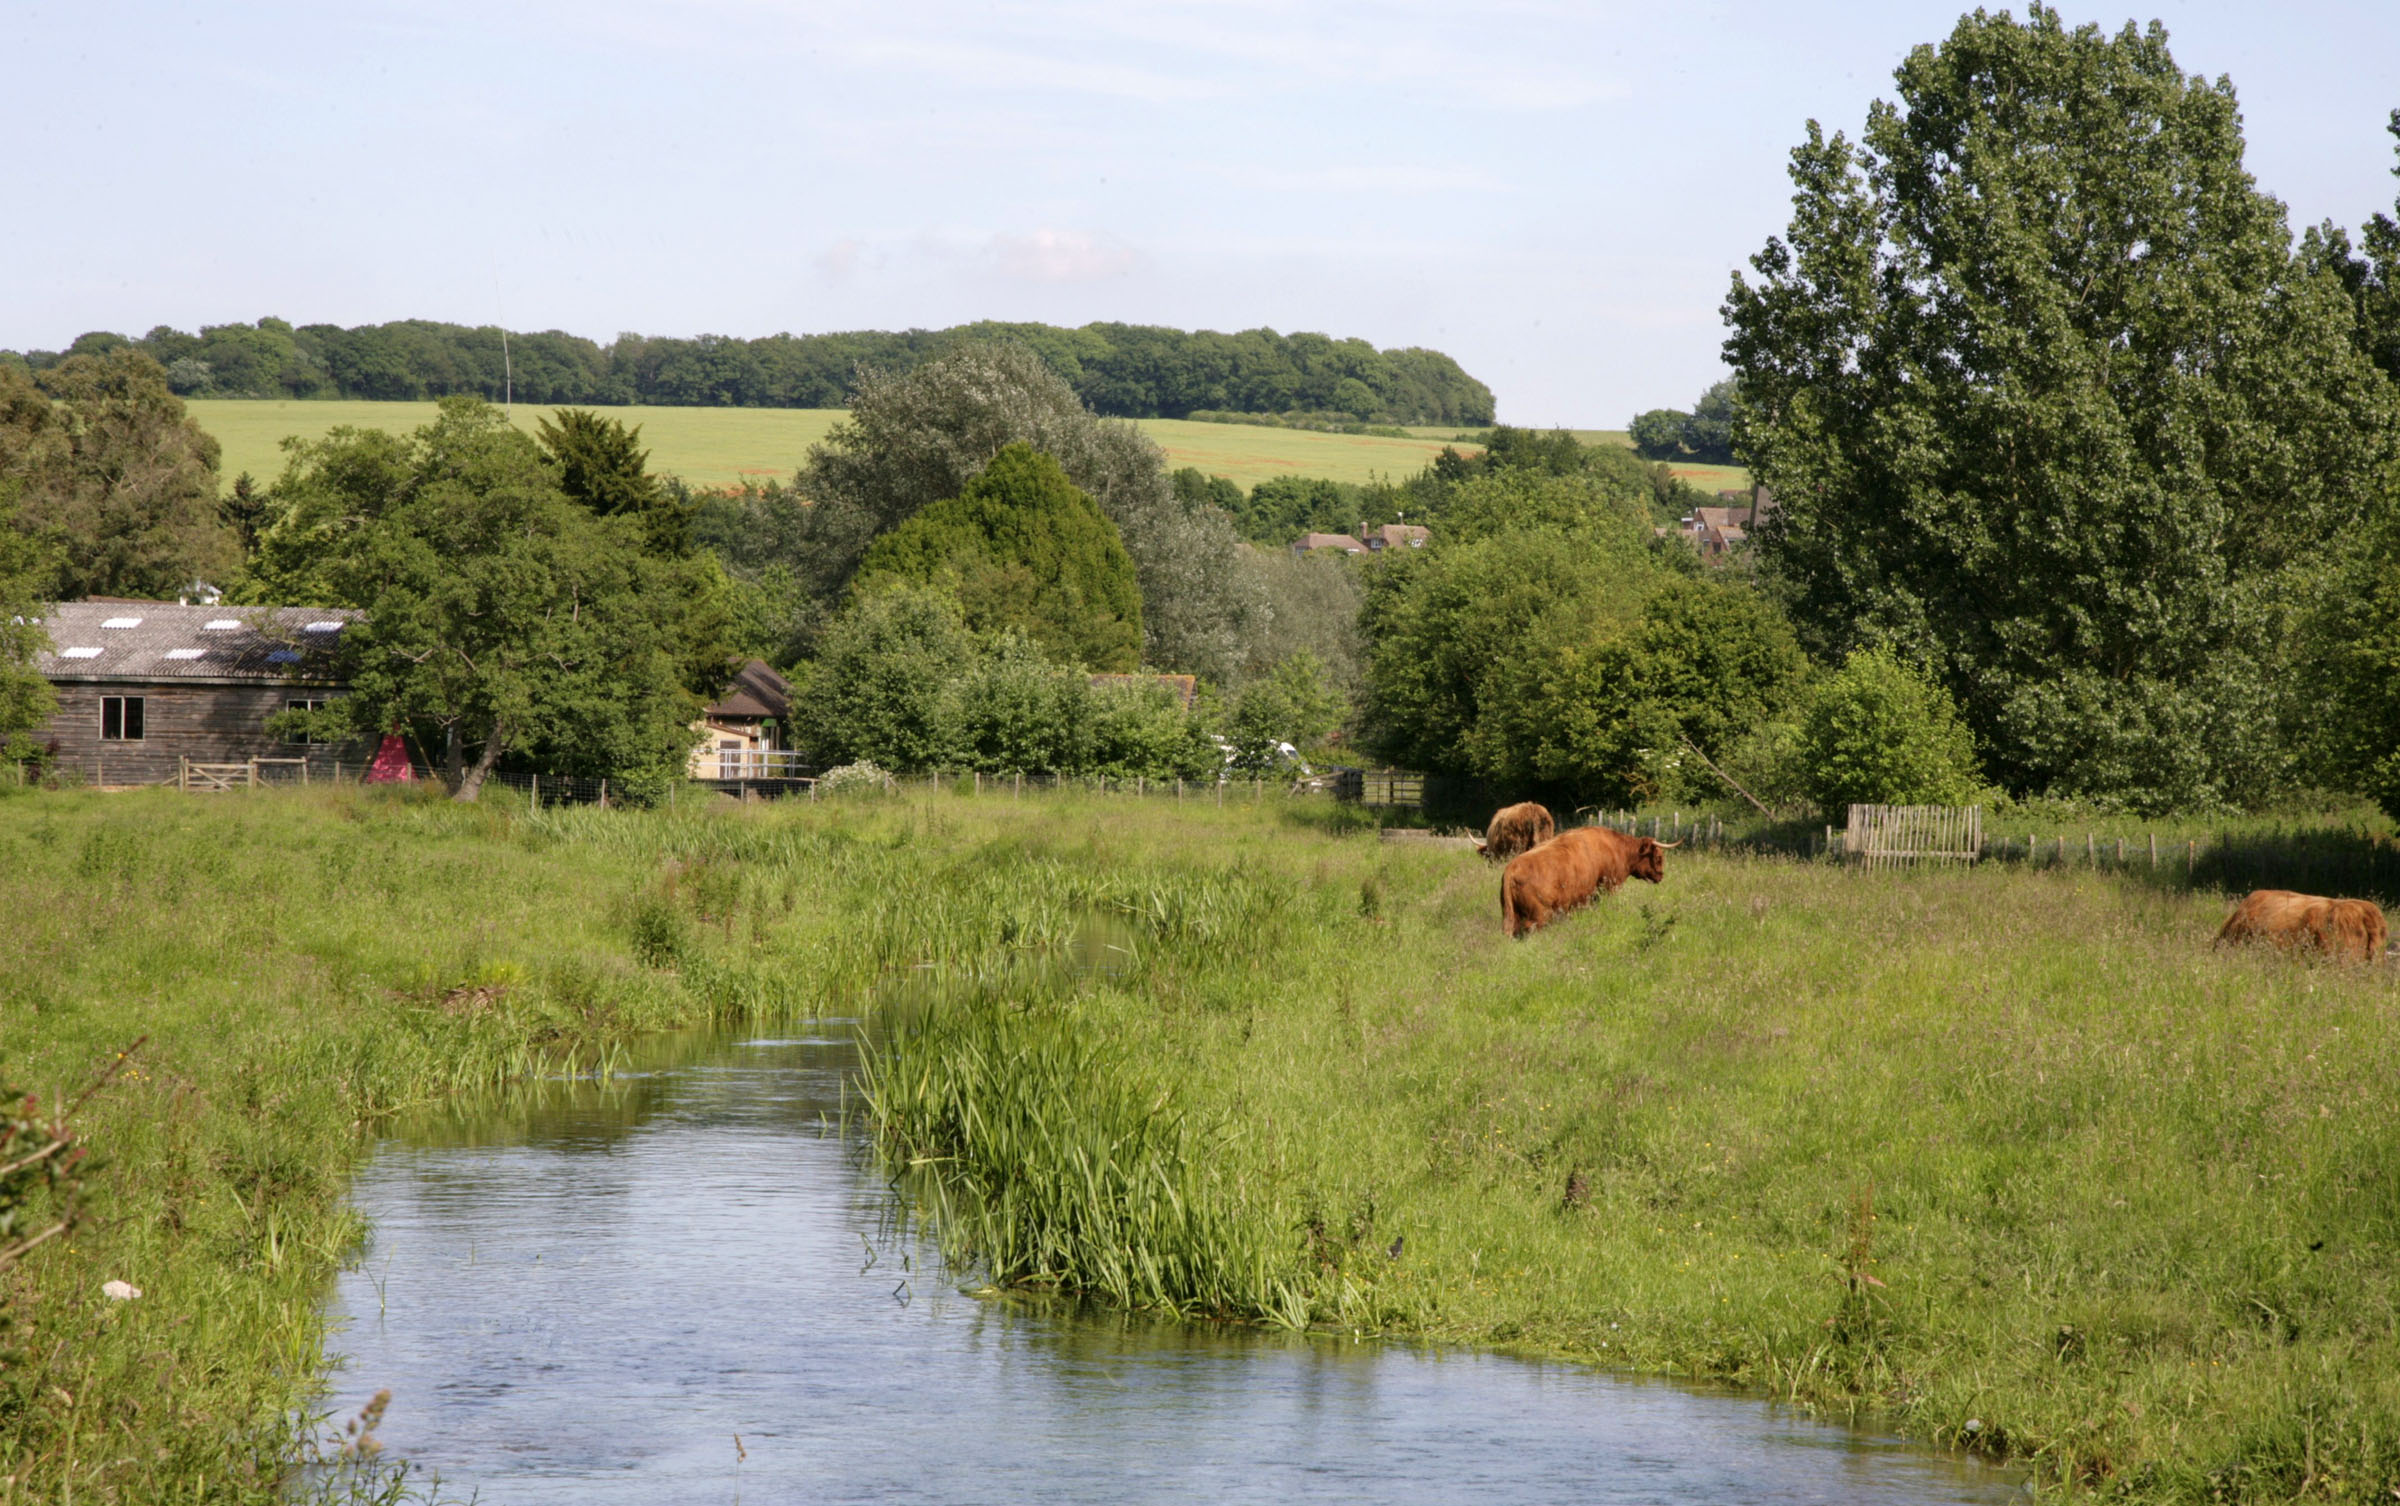 Cattle eating grass next to river